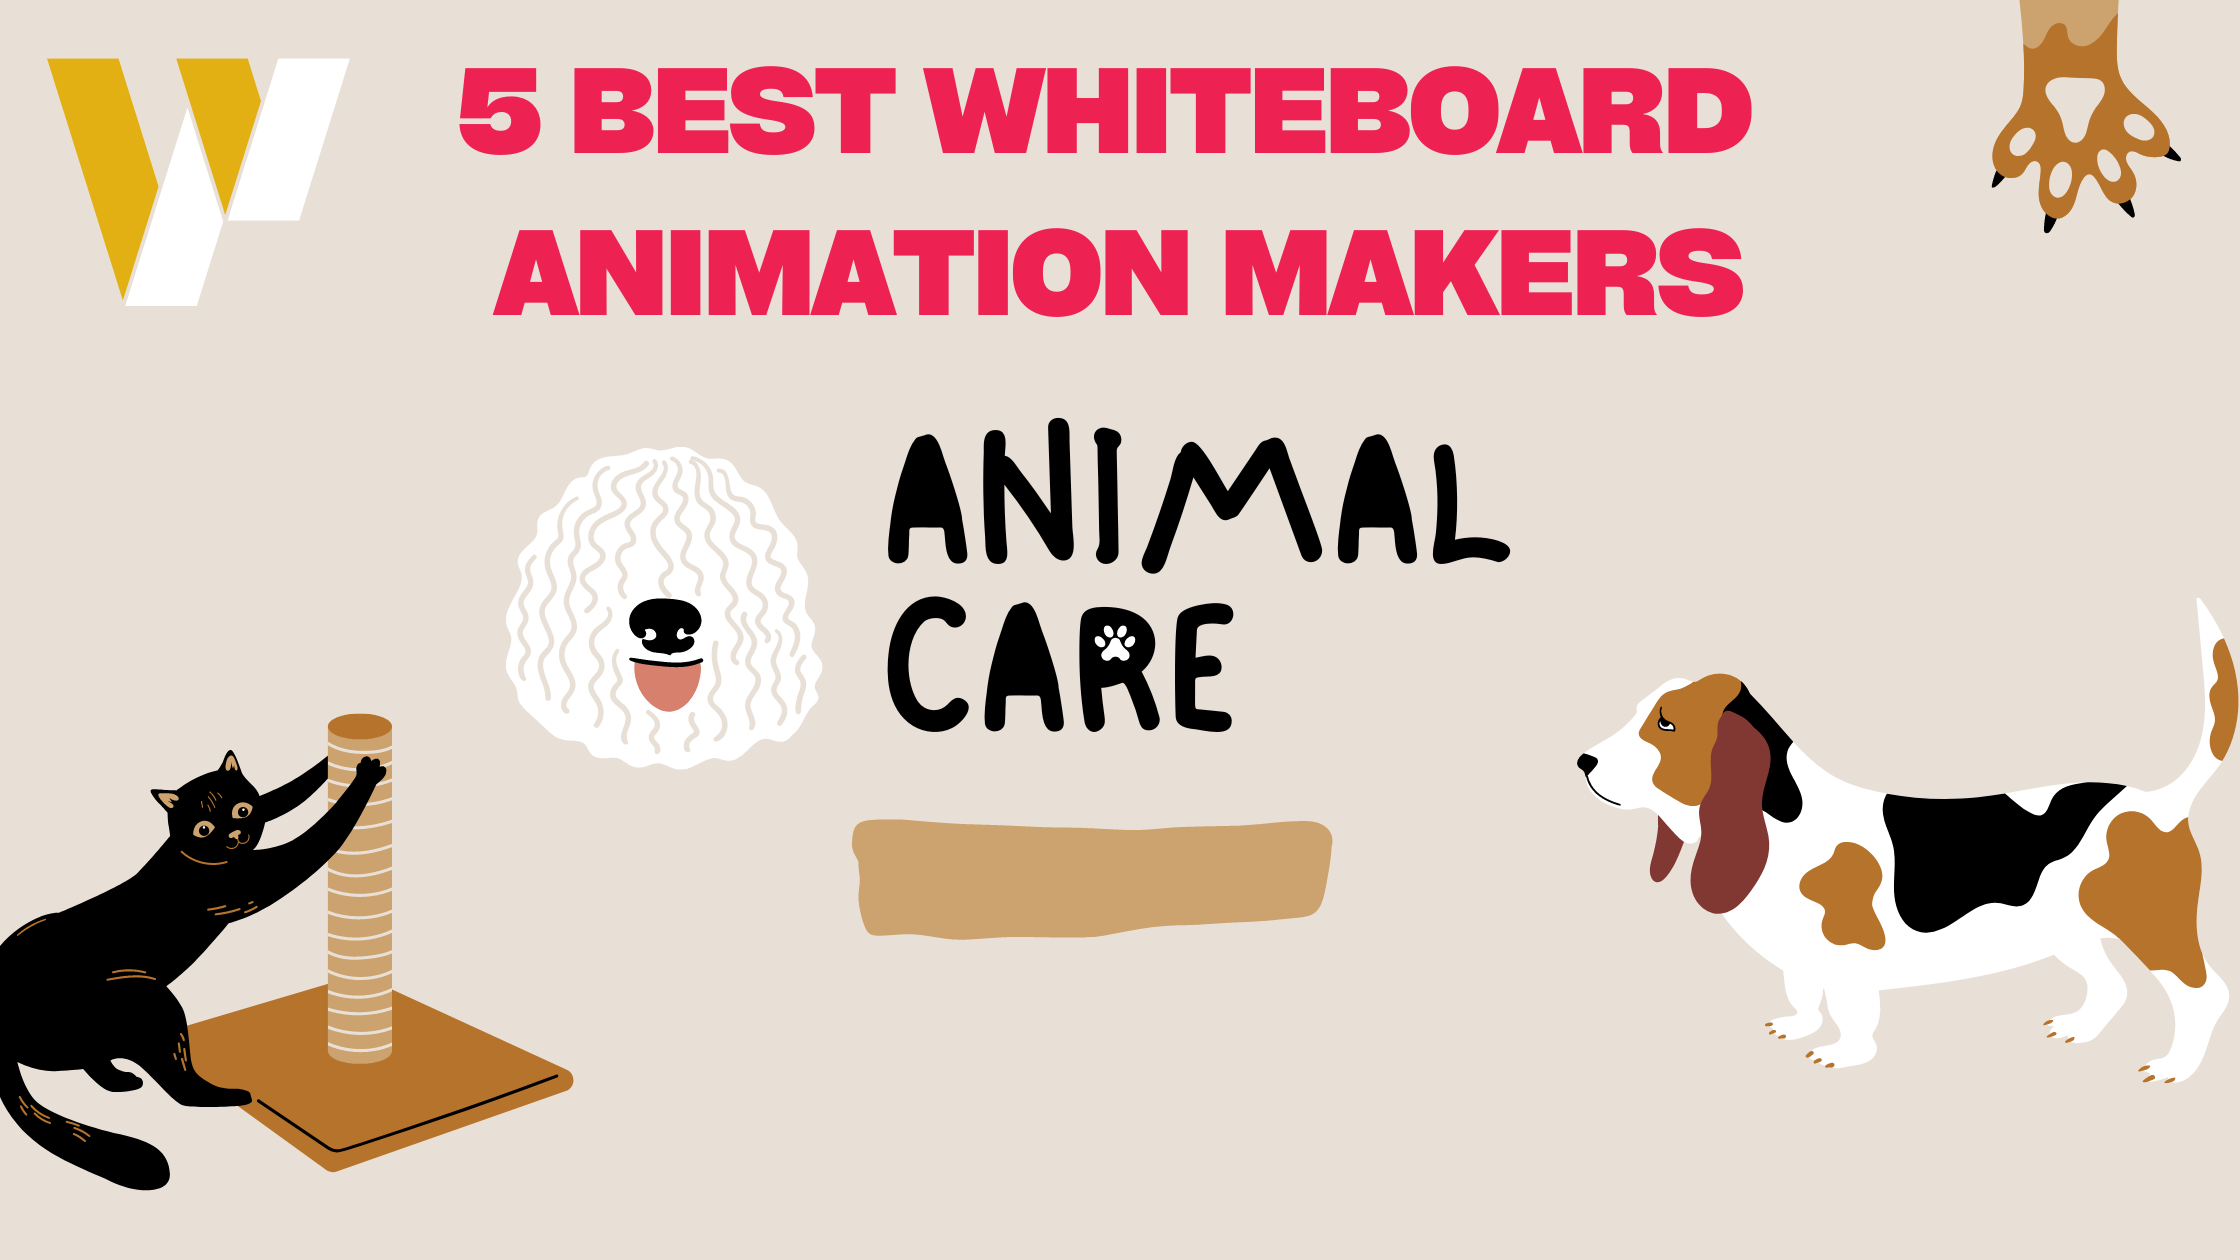 Free Whiteboard Animation Video Tools